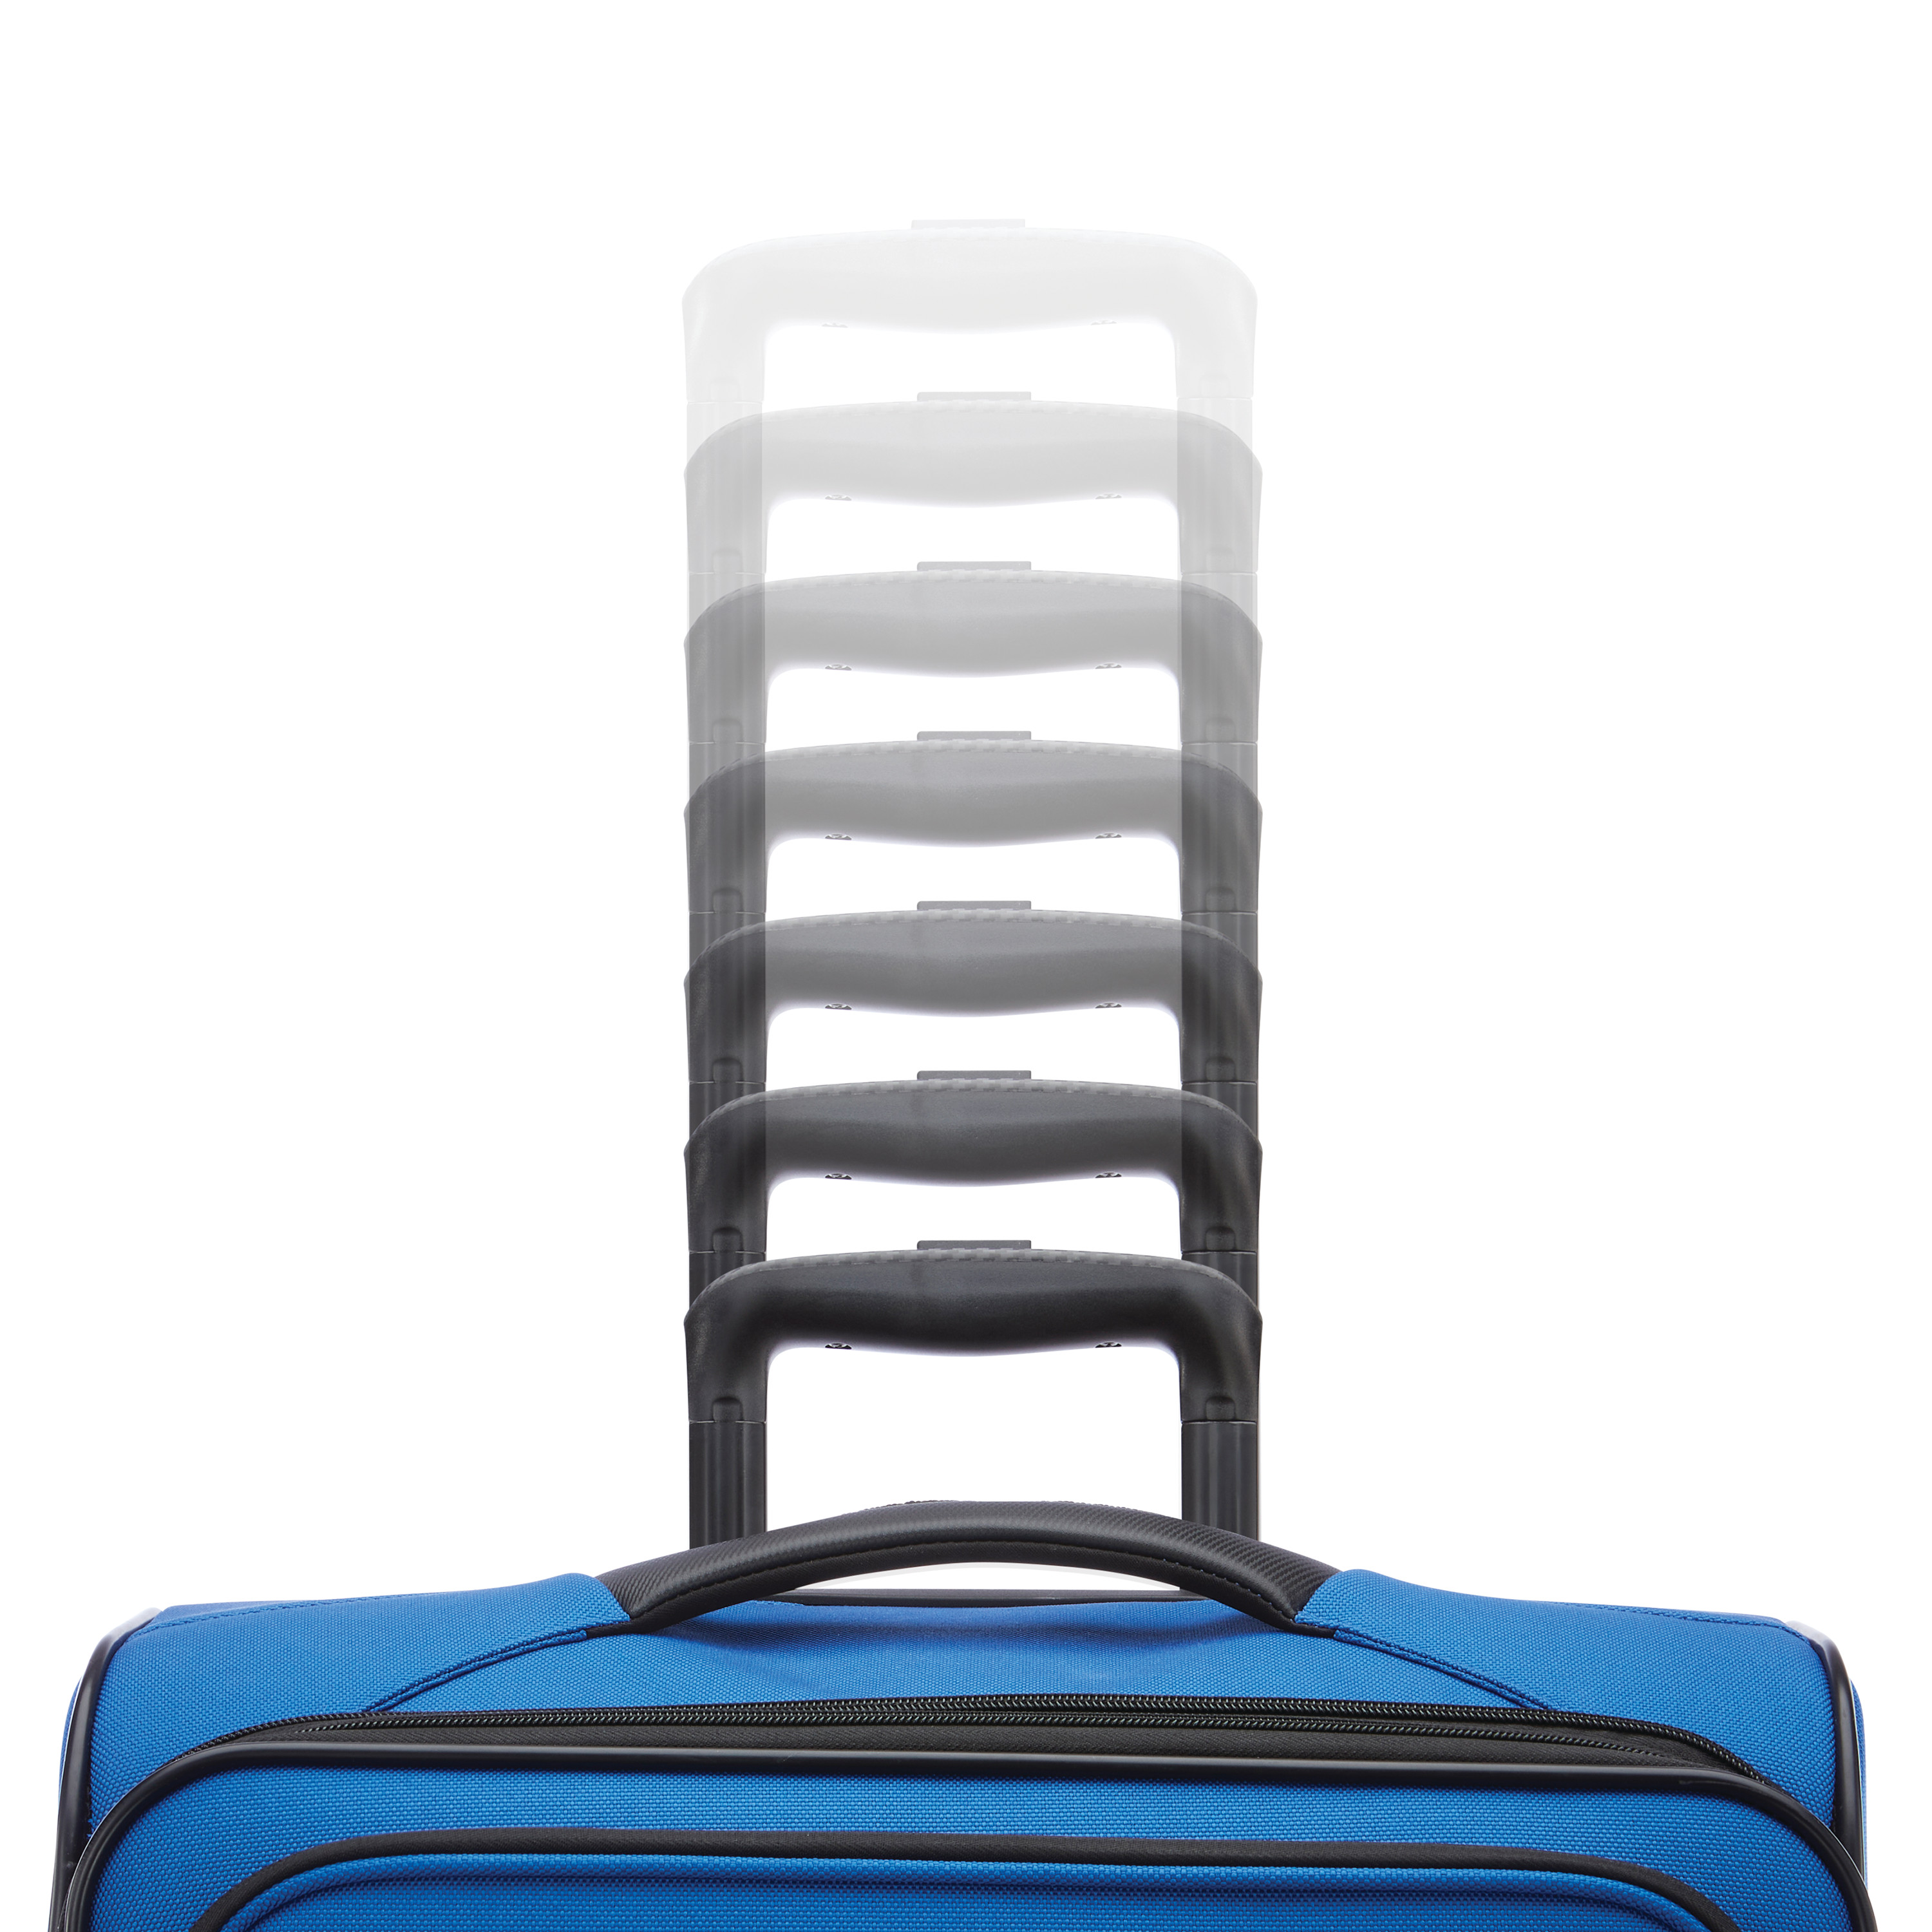 American Tourister 4 KIX 2.0 28" Upright Spinner Luggage - image 3 of 8